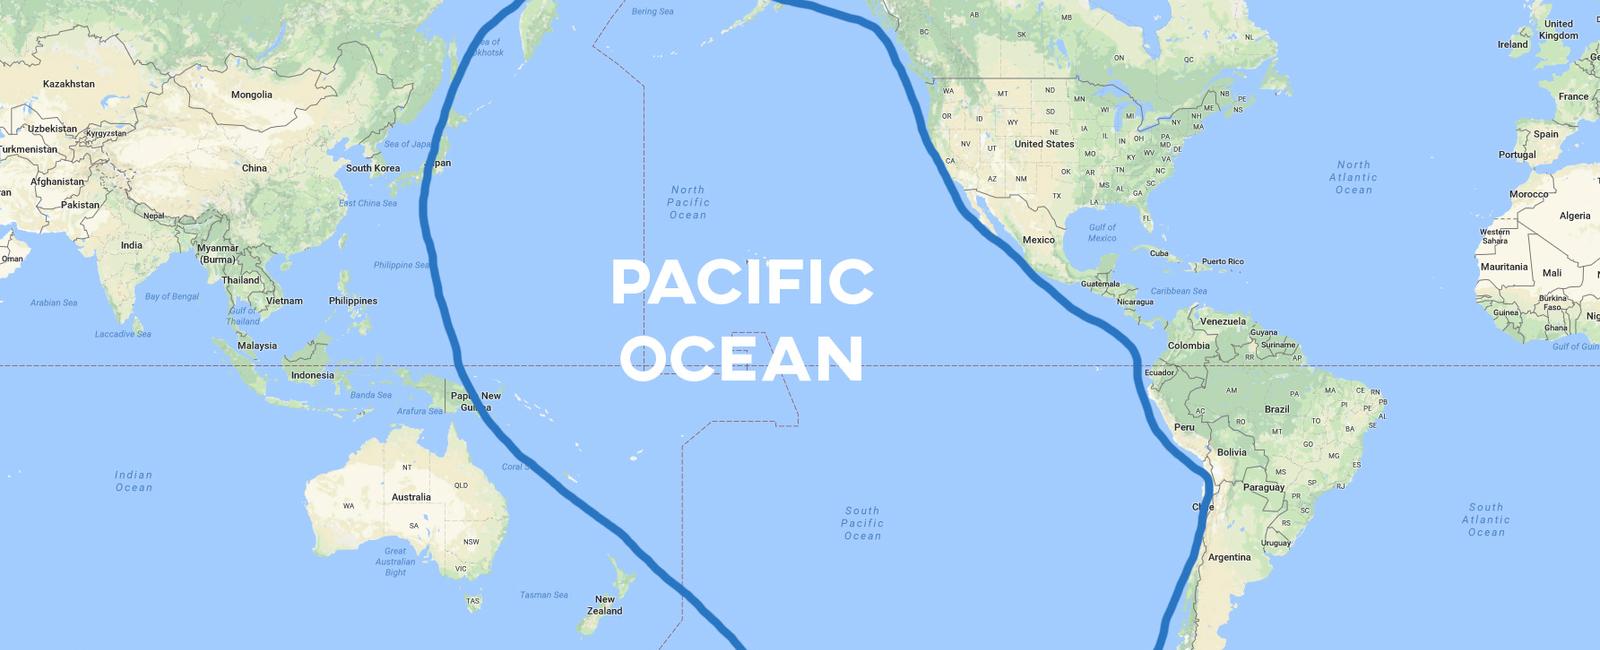 The largest ocean on earth is the pacific ocean